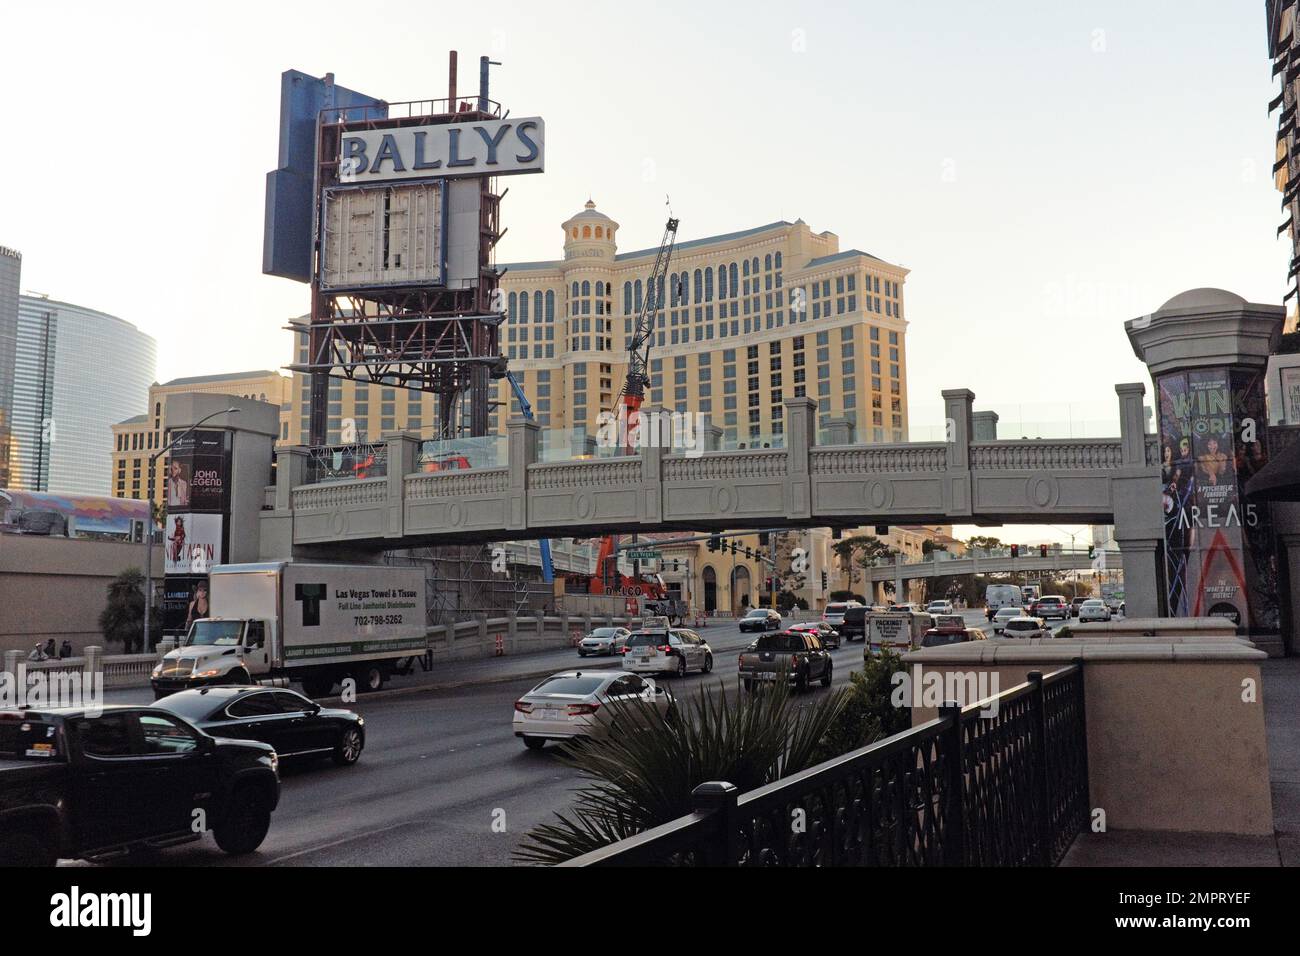 Rebranding of the iconic Bally's Las Vegas Hotel and Casino into the Horseshoe includes changing of signage.  Photo shows November 15, 2022 overhaul. Stock Photo